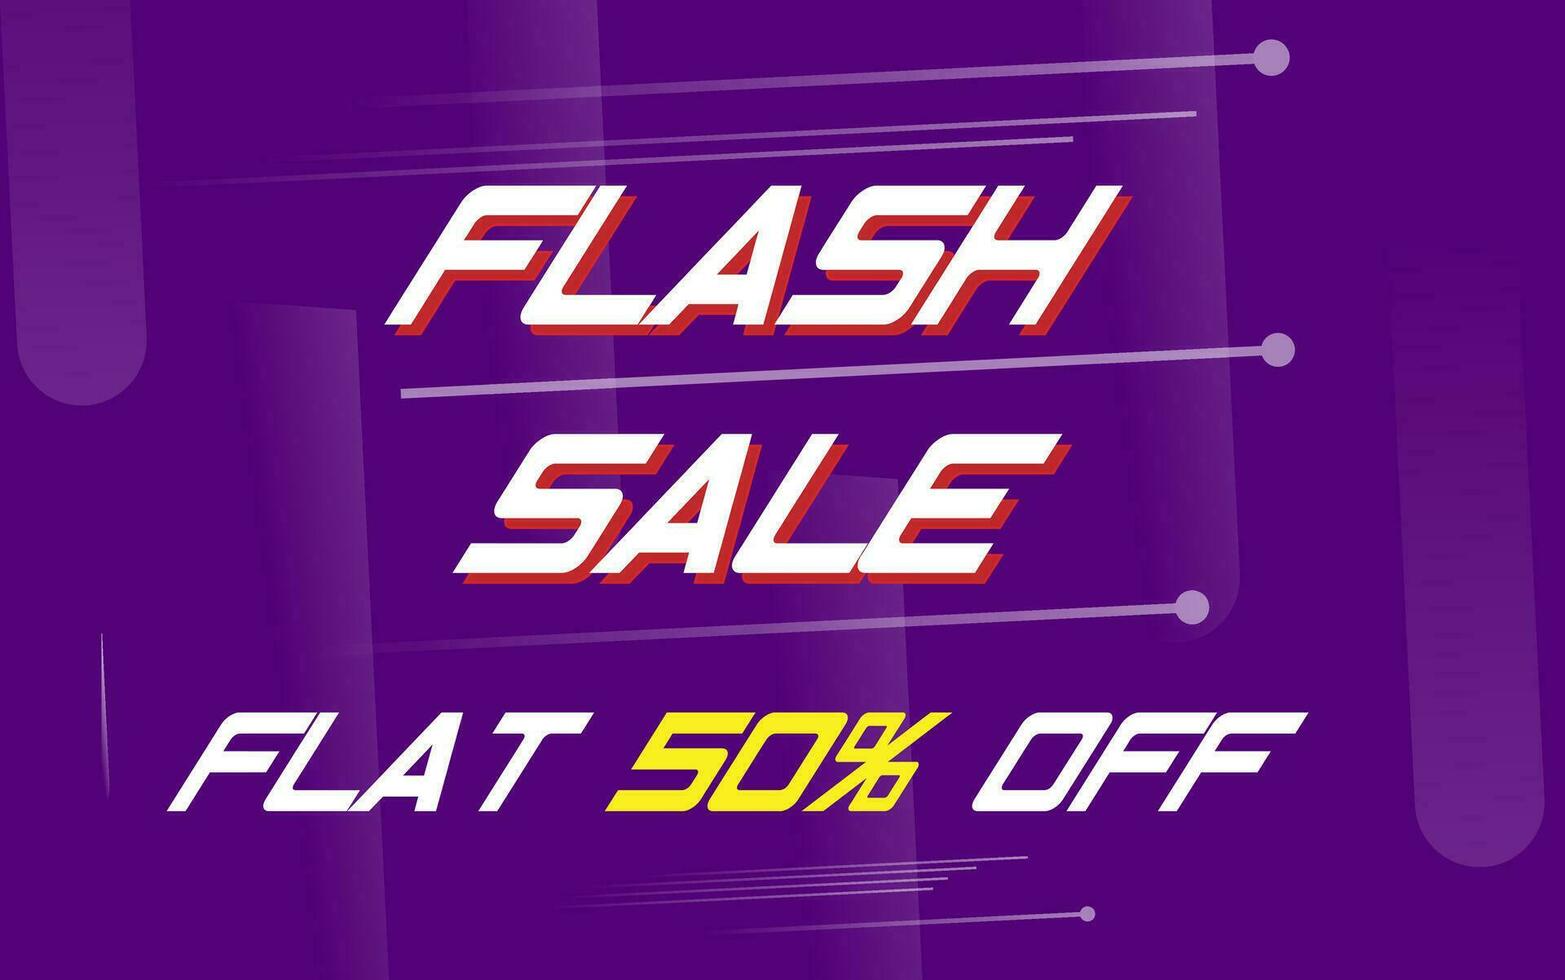 Flat off offer banner design with text Flash Sale. vector